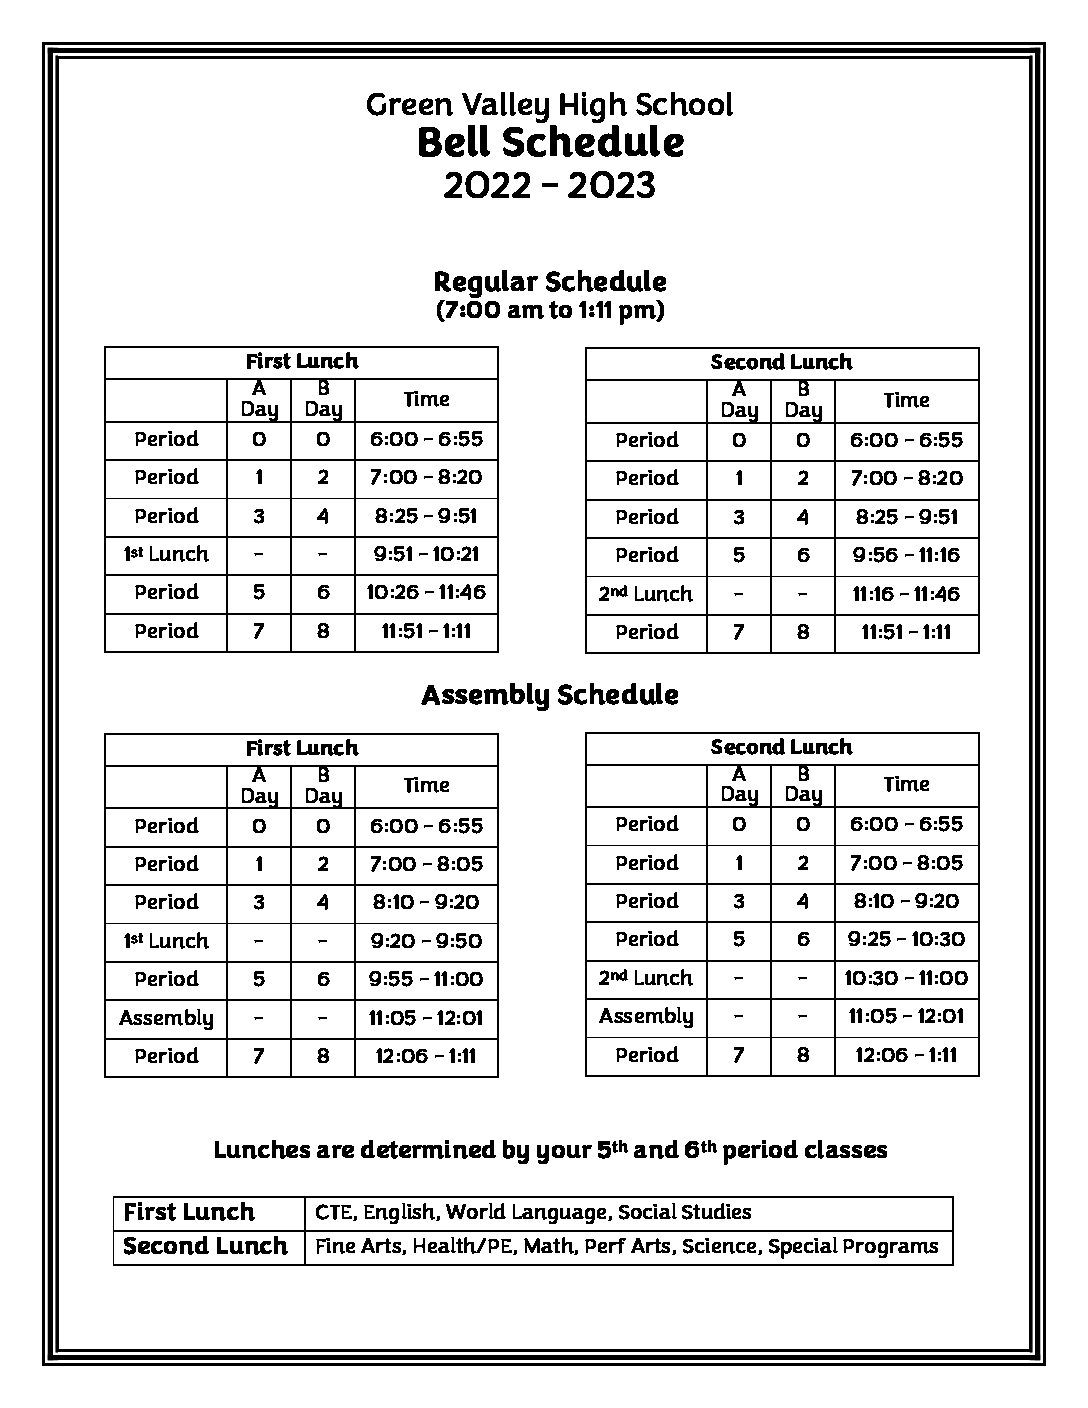 Assembly Schedule